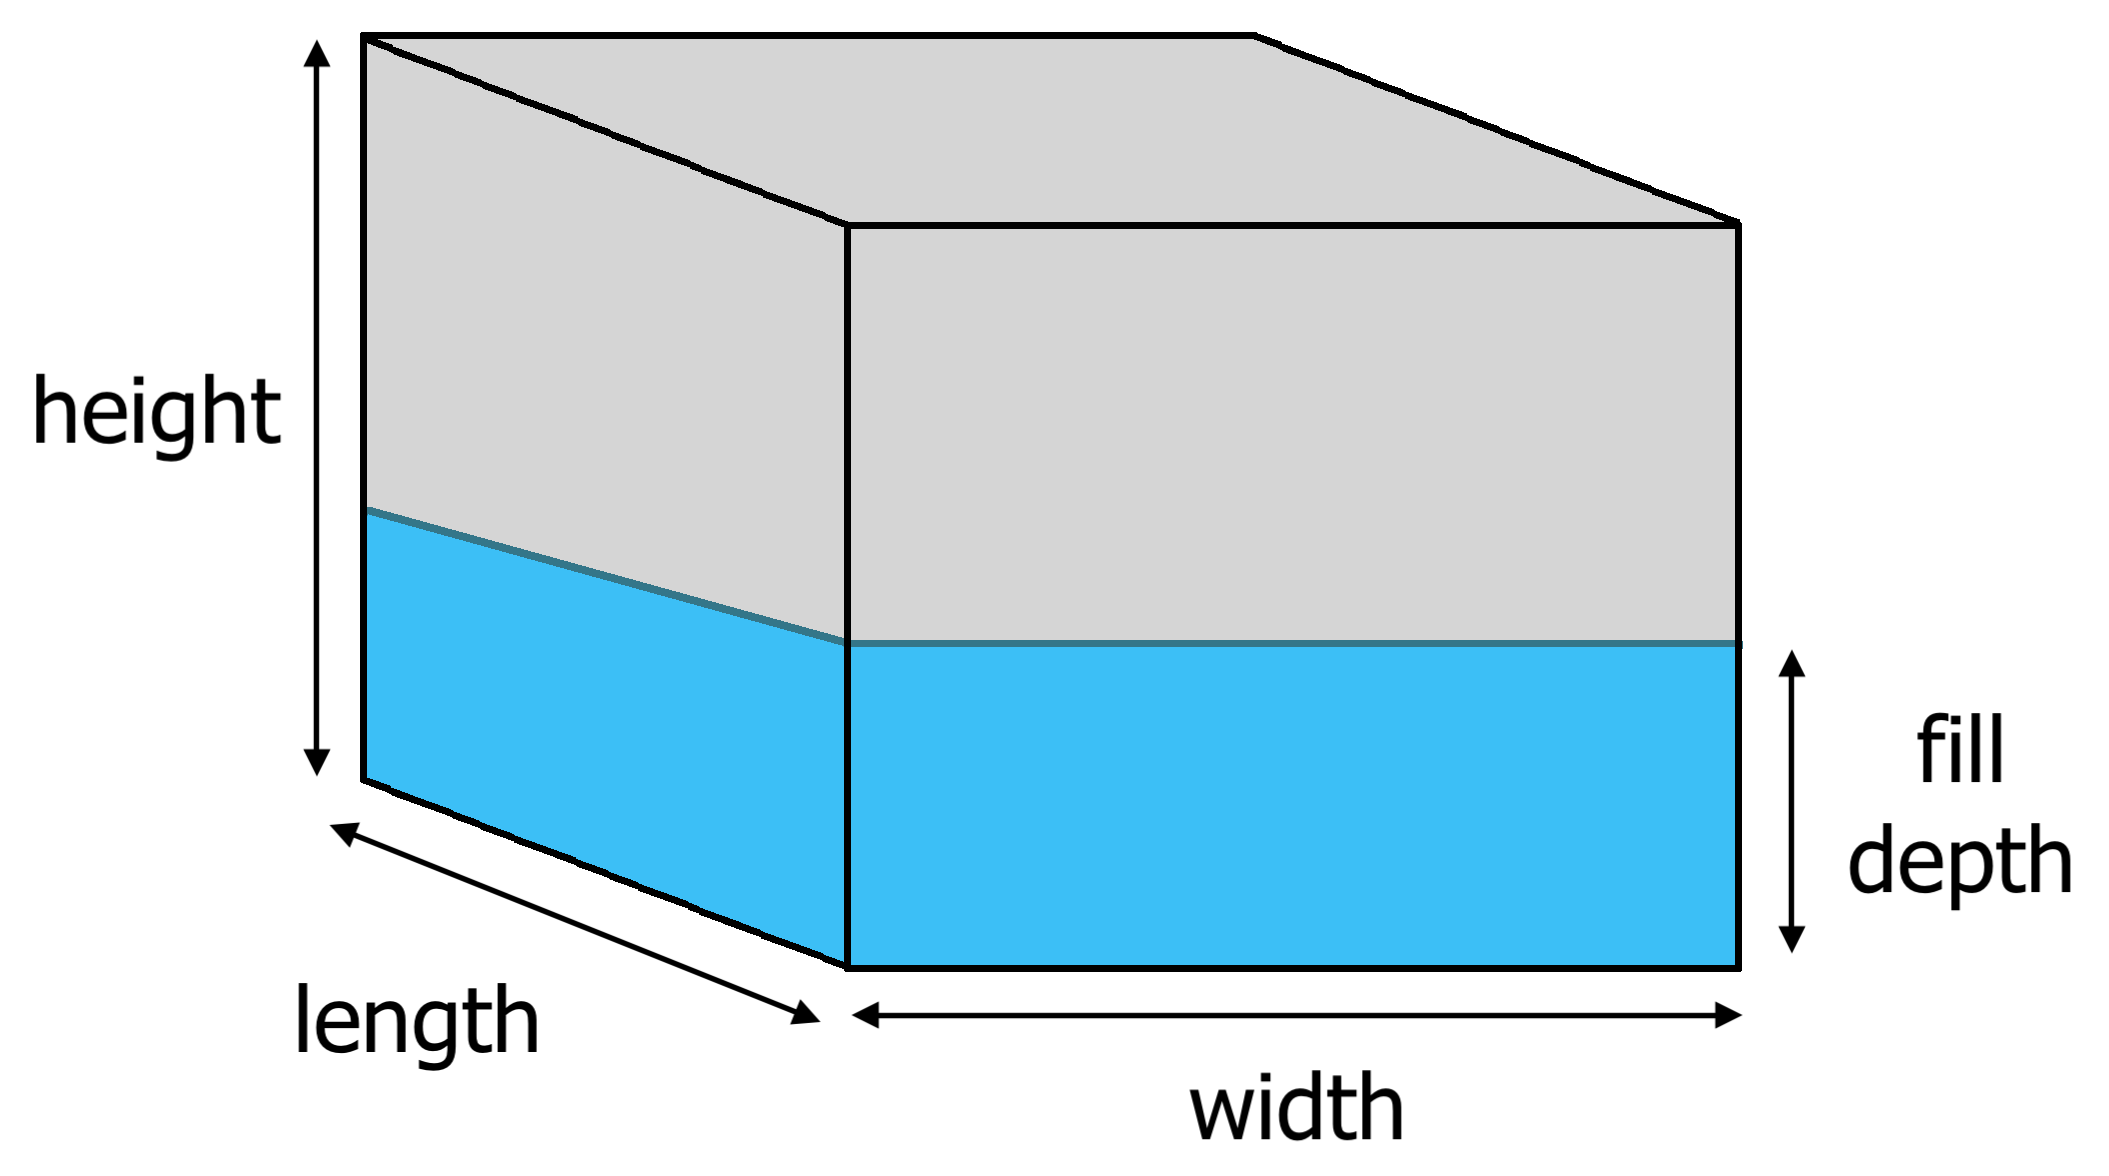 rectangular tank diagram showing length, width, height, and fill depth dimensions